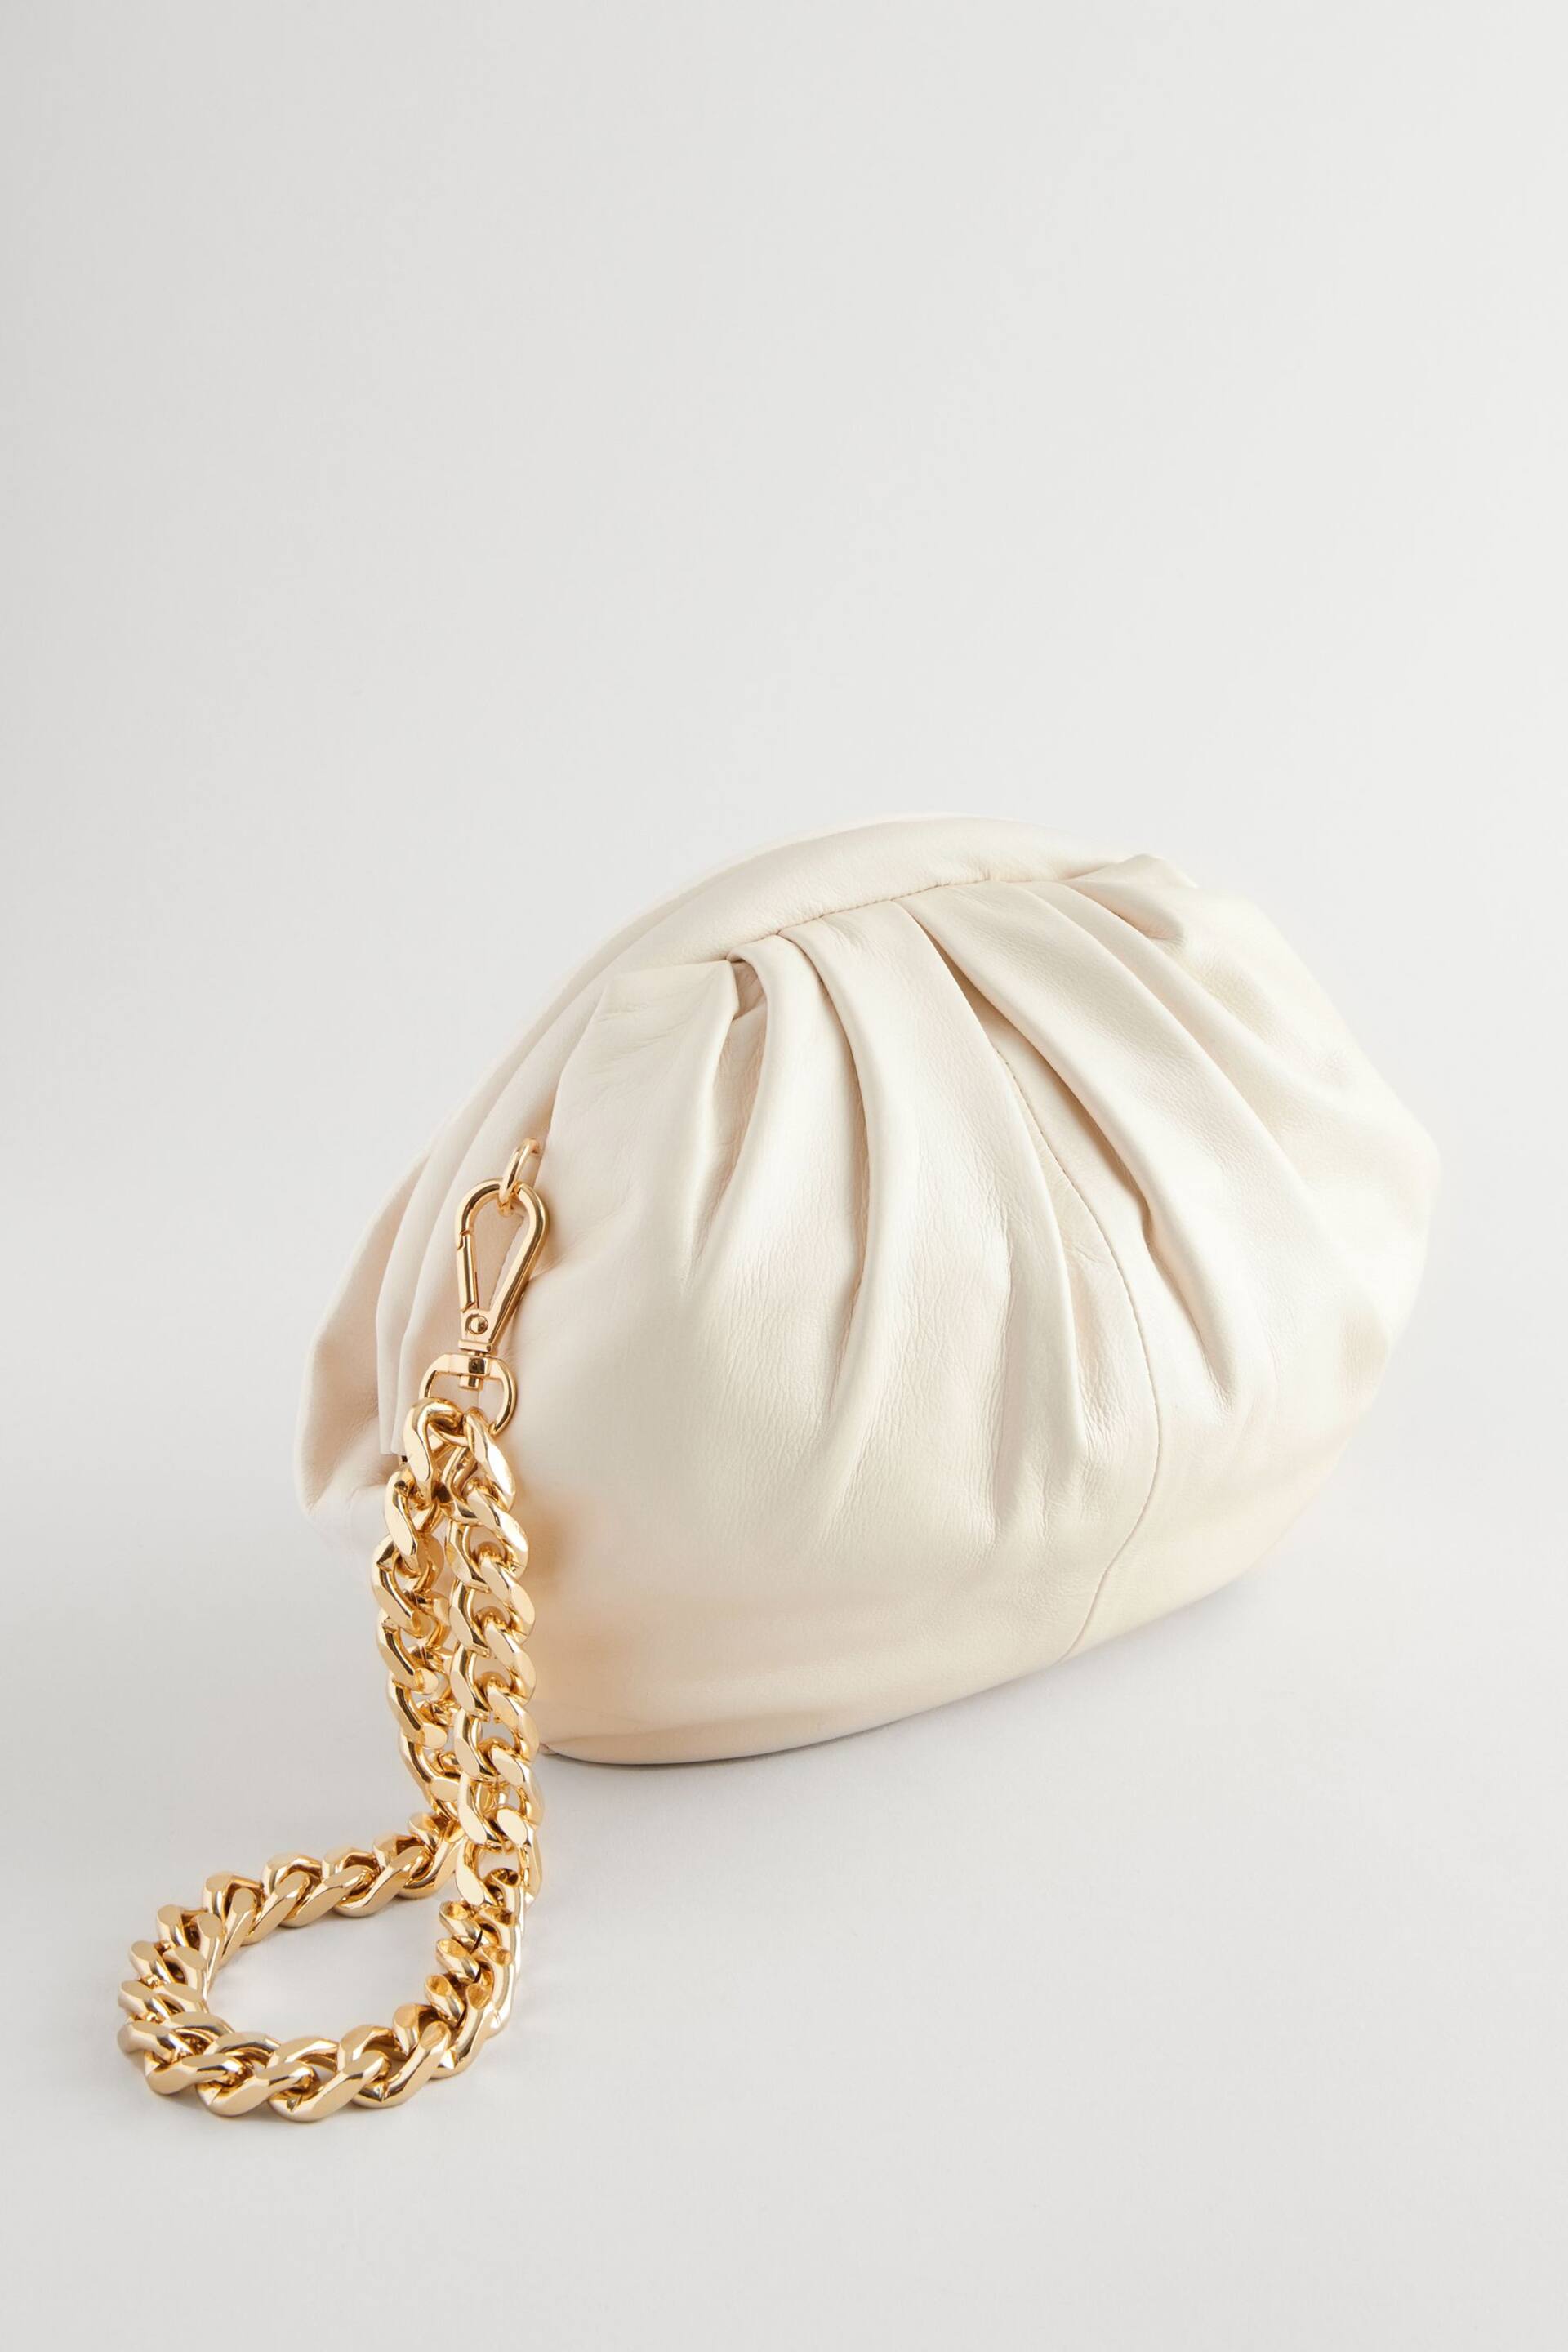 White Leather Snap Clutch Bag - Image 4 of 7